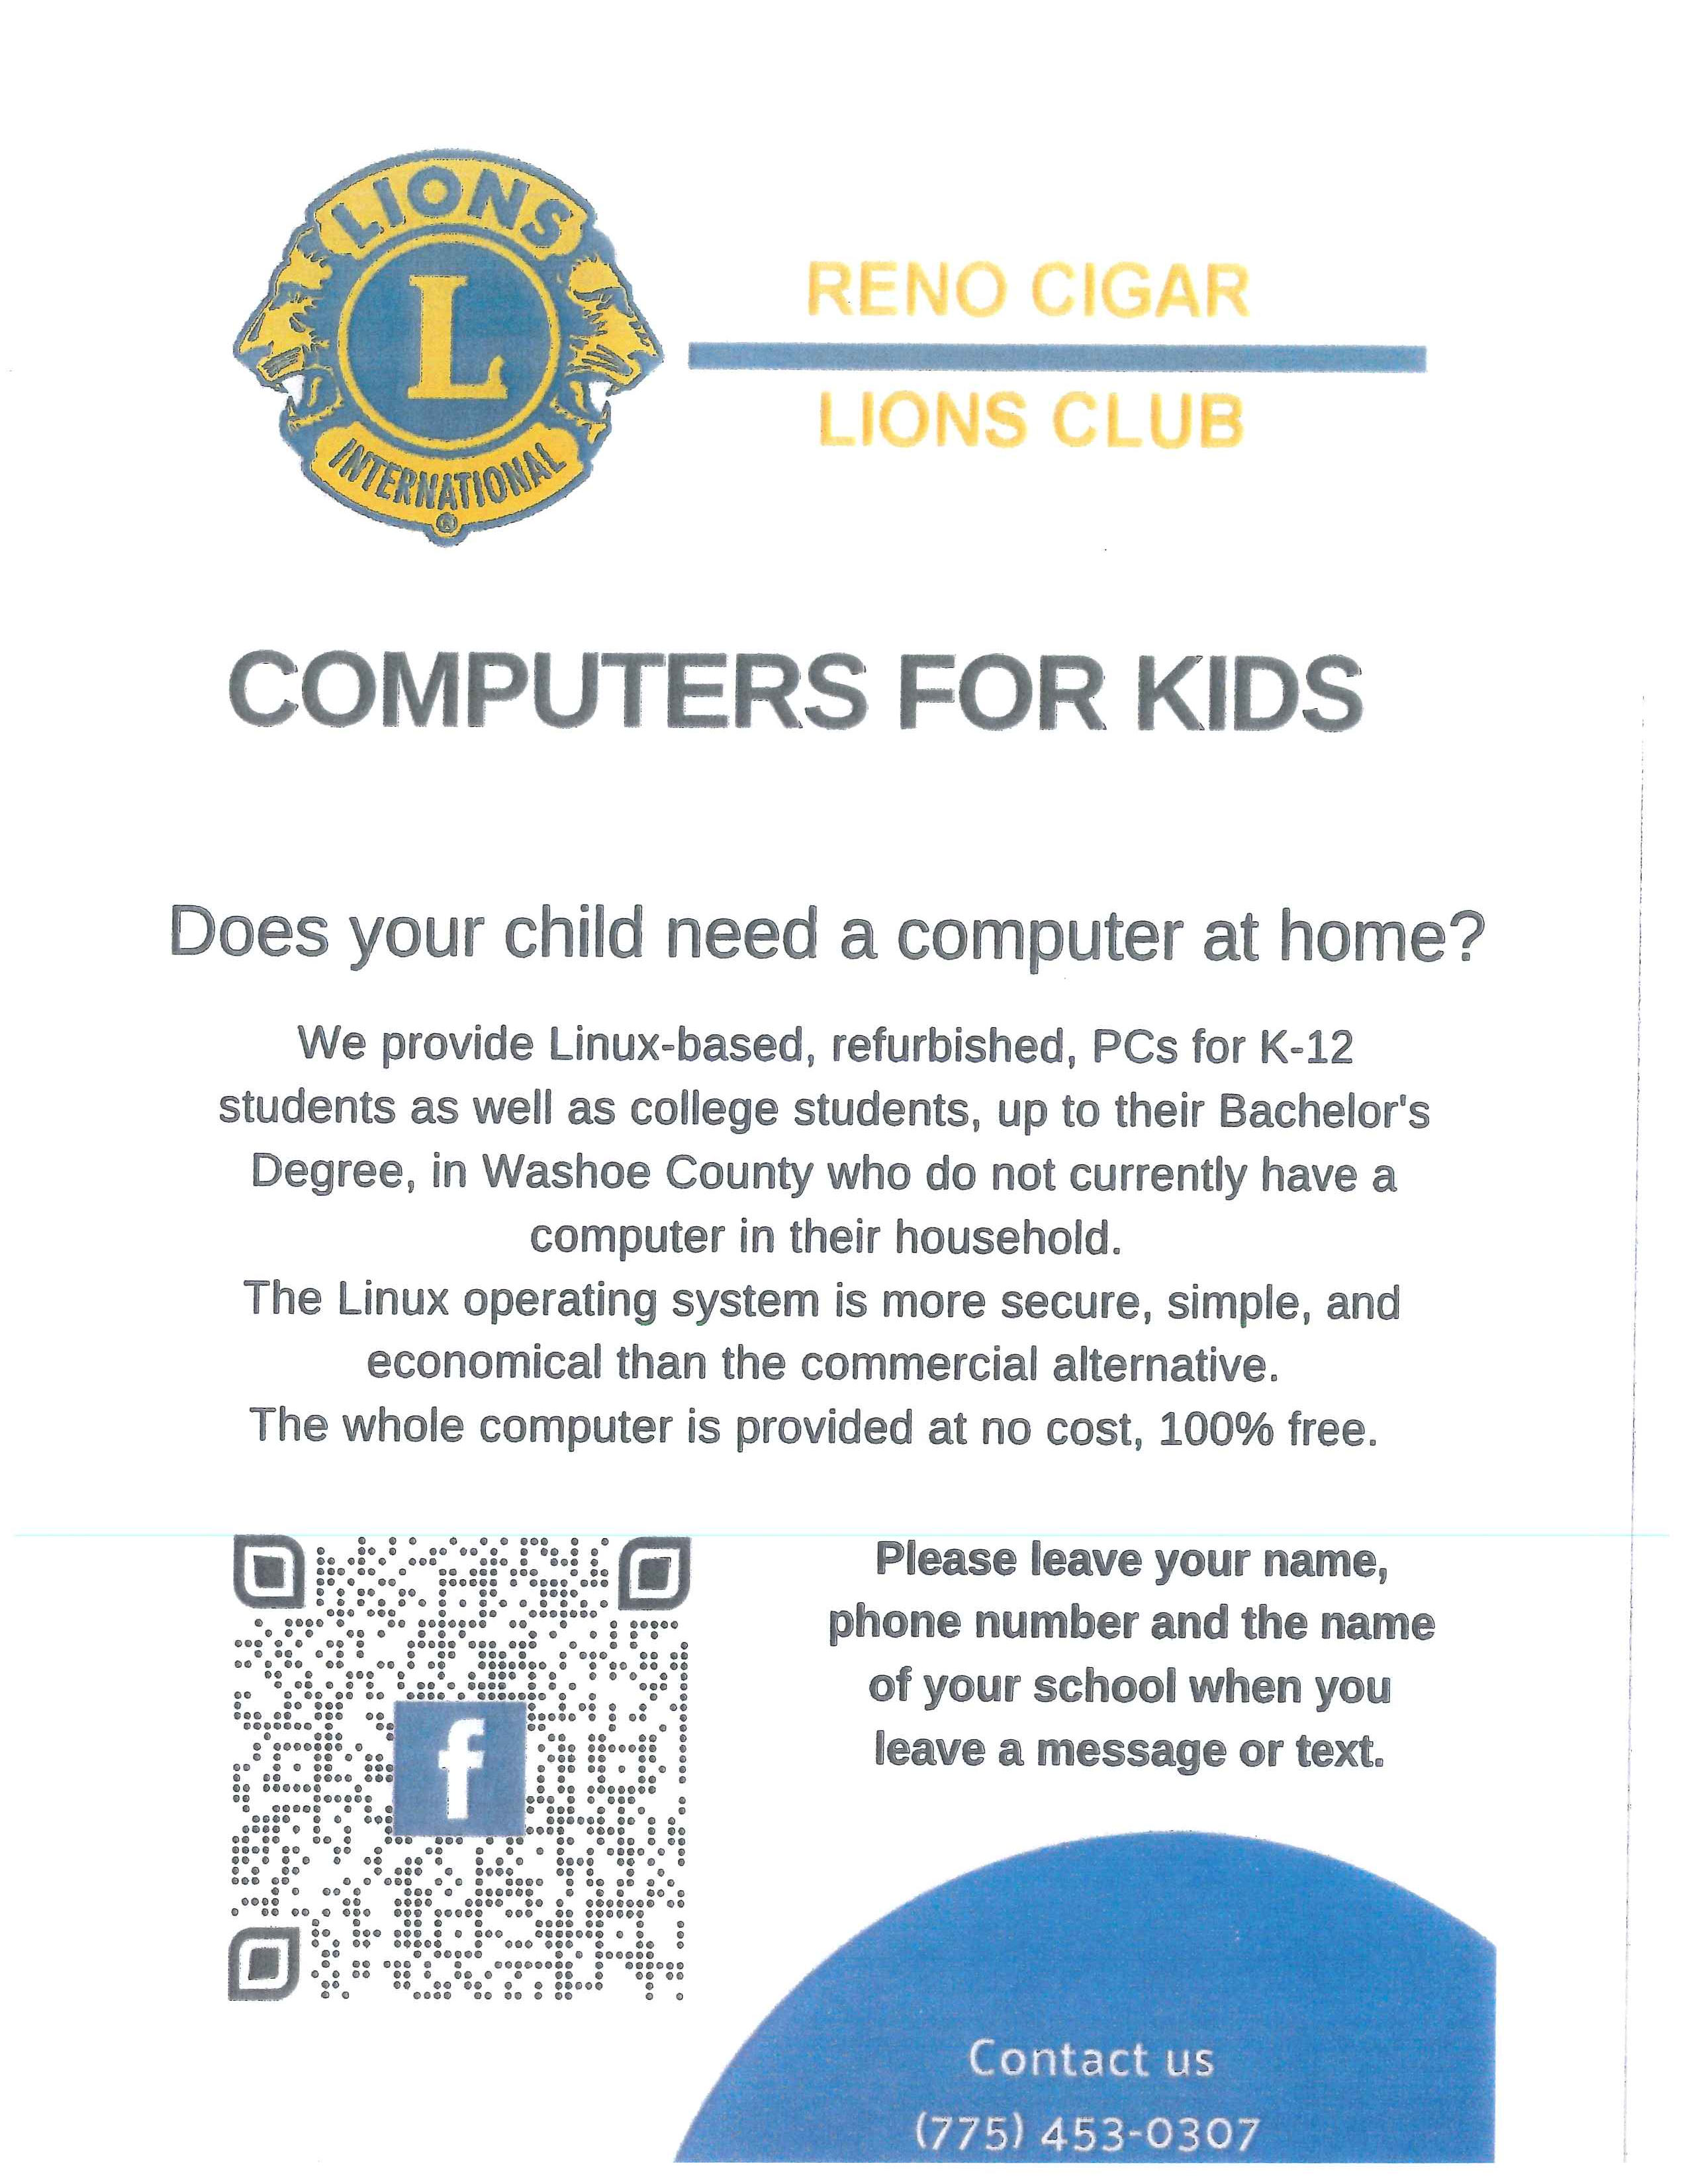 Computers for kids flyer